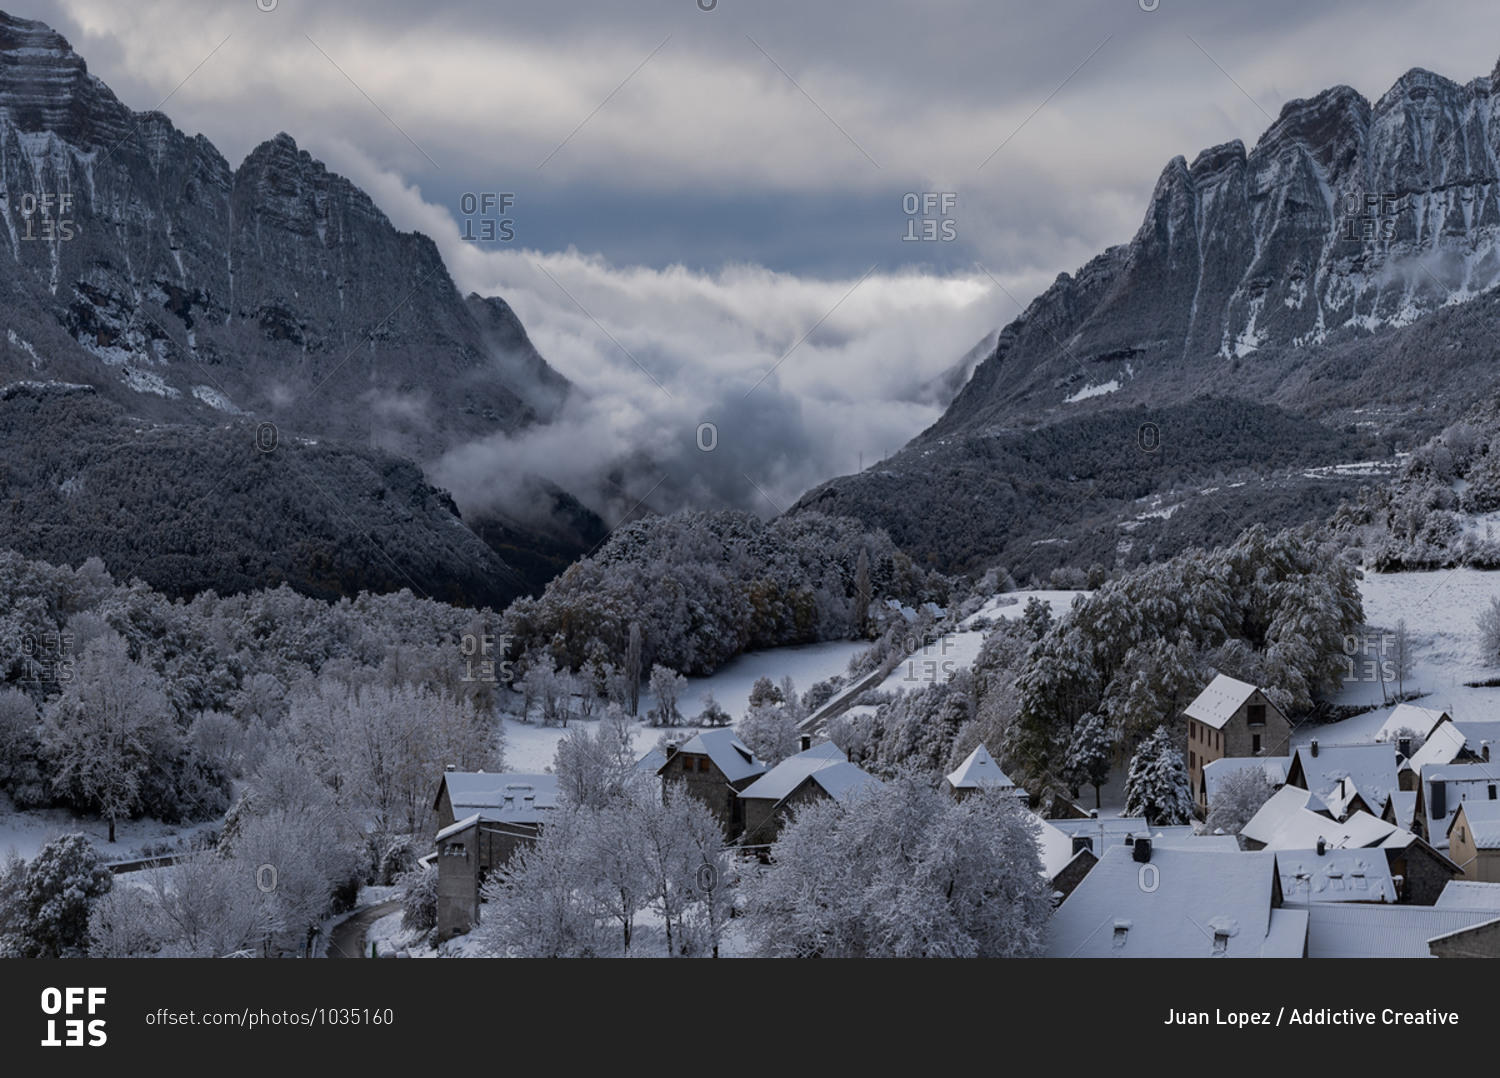 Amazing scenery of village with residential houses located in highland valley in Pyrenees in winter